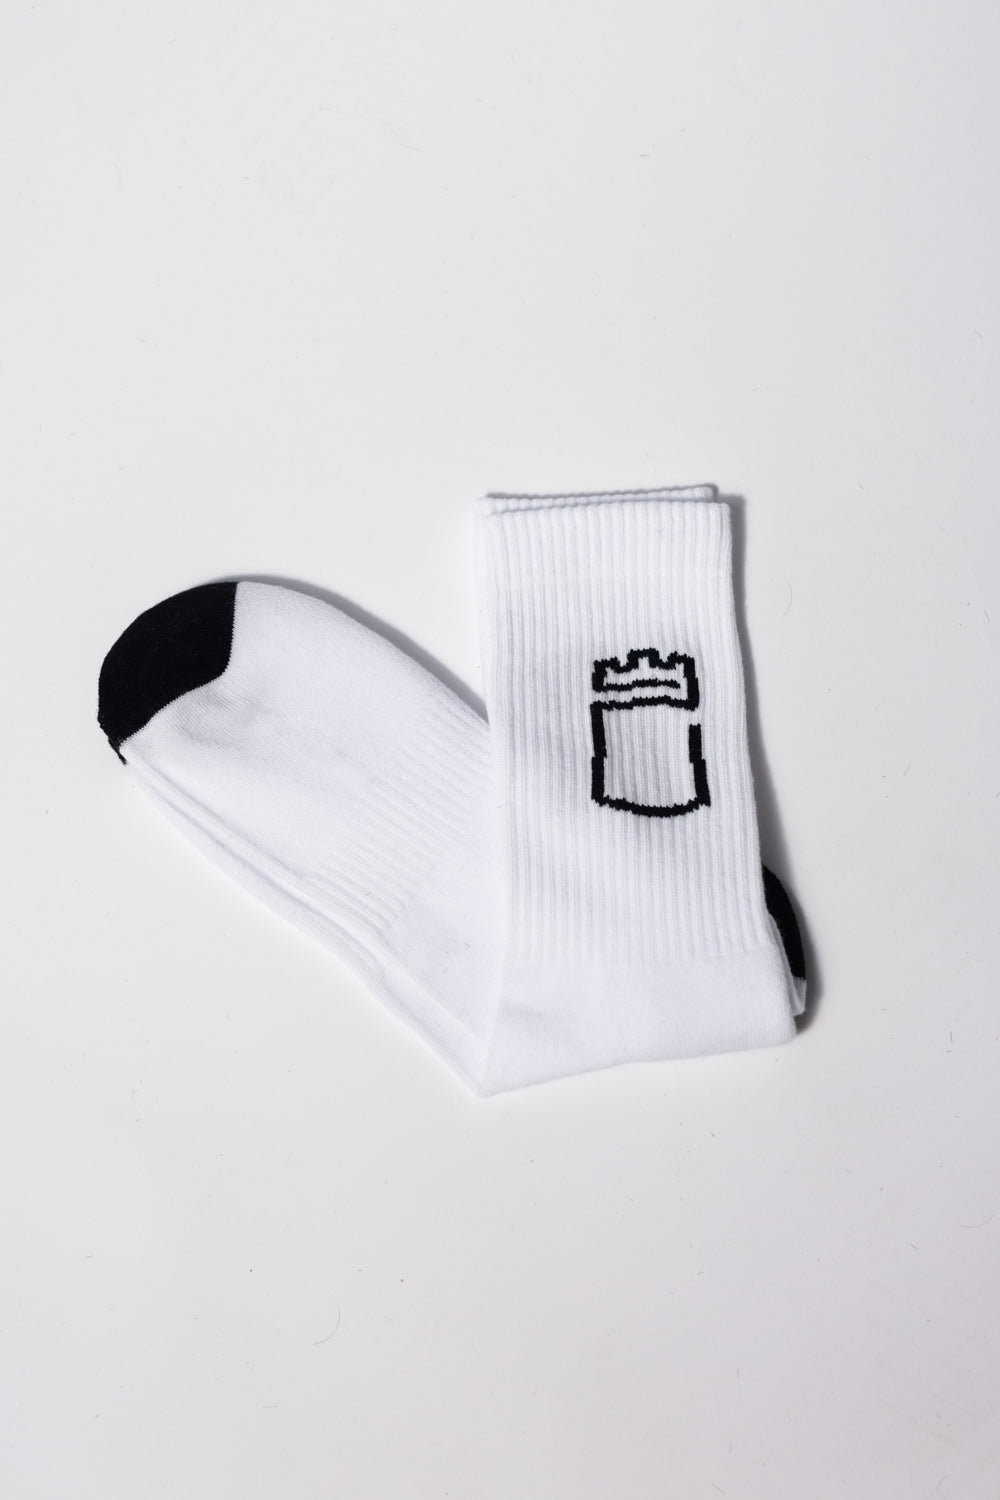 REMPIRE TOWER SOCKS